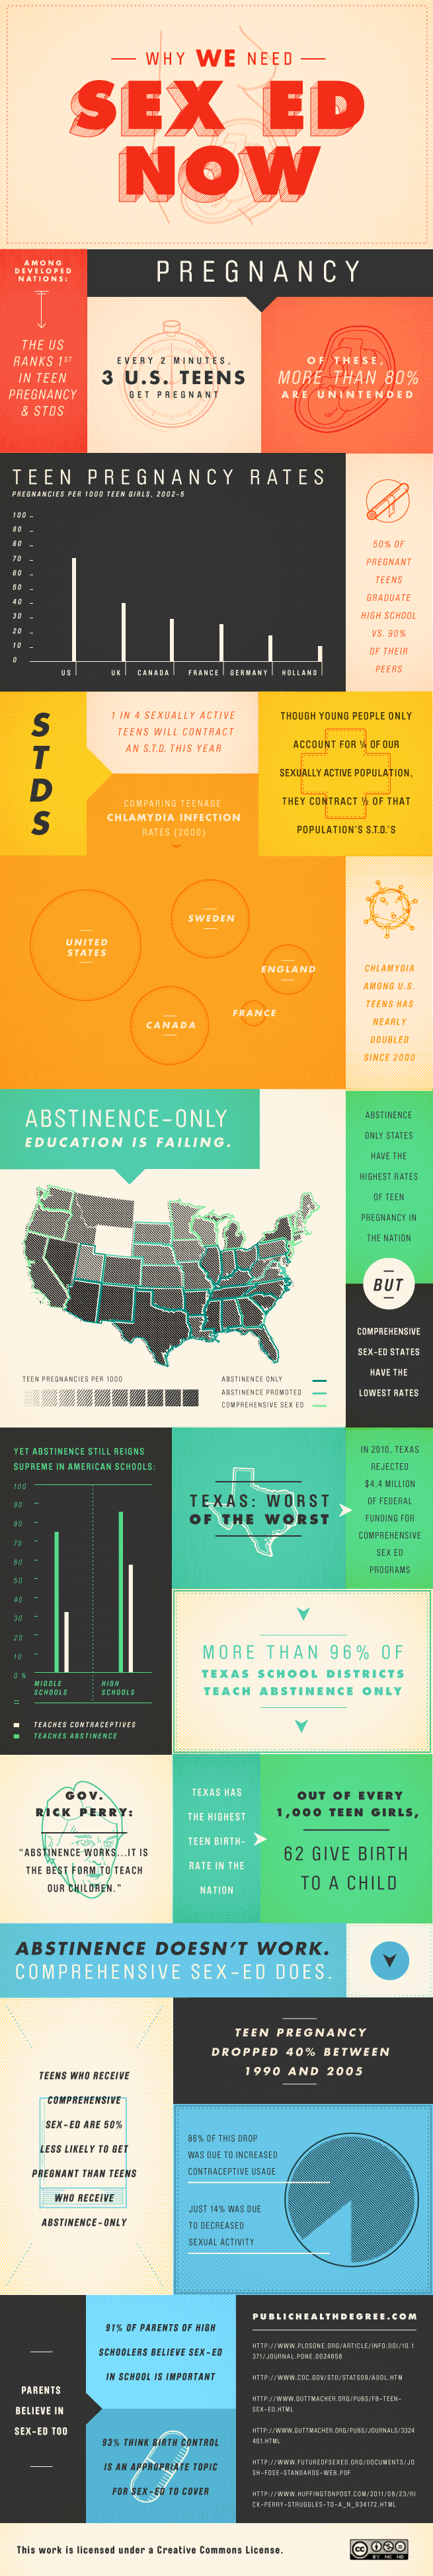 Sex ED Infographic: Why We Need Sex ED Now - ComplianceandSafety.com